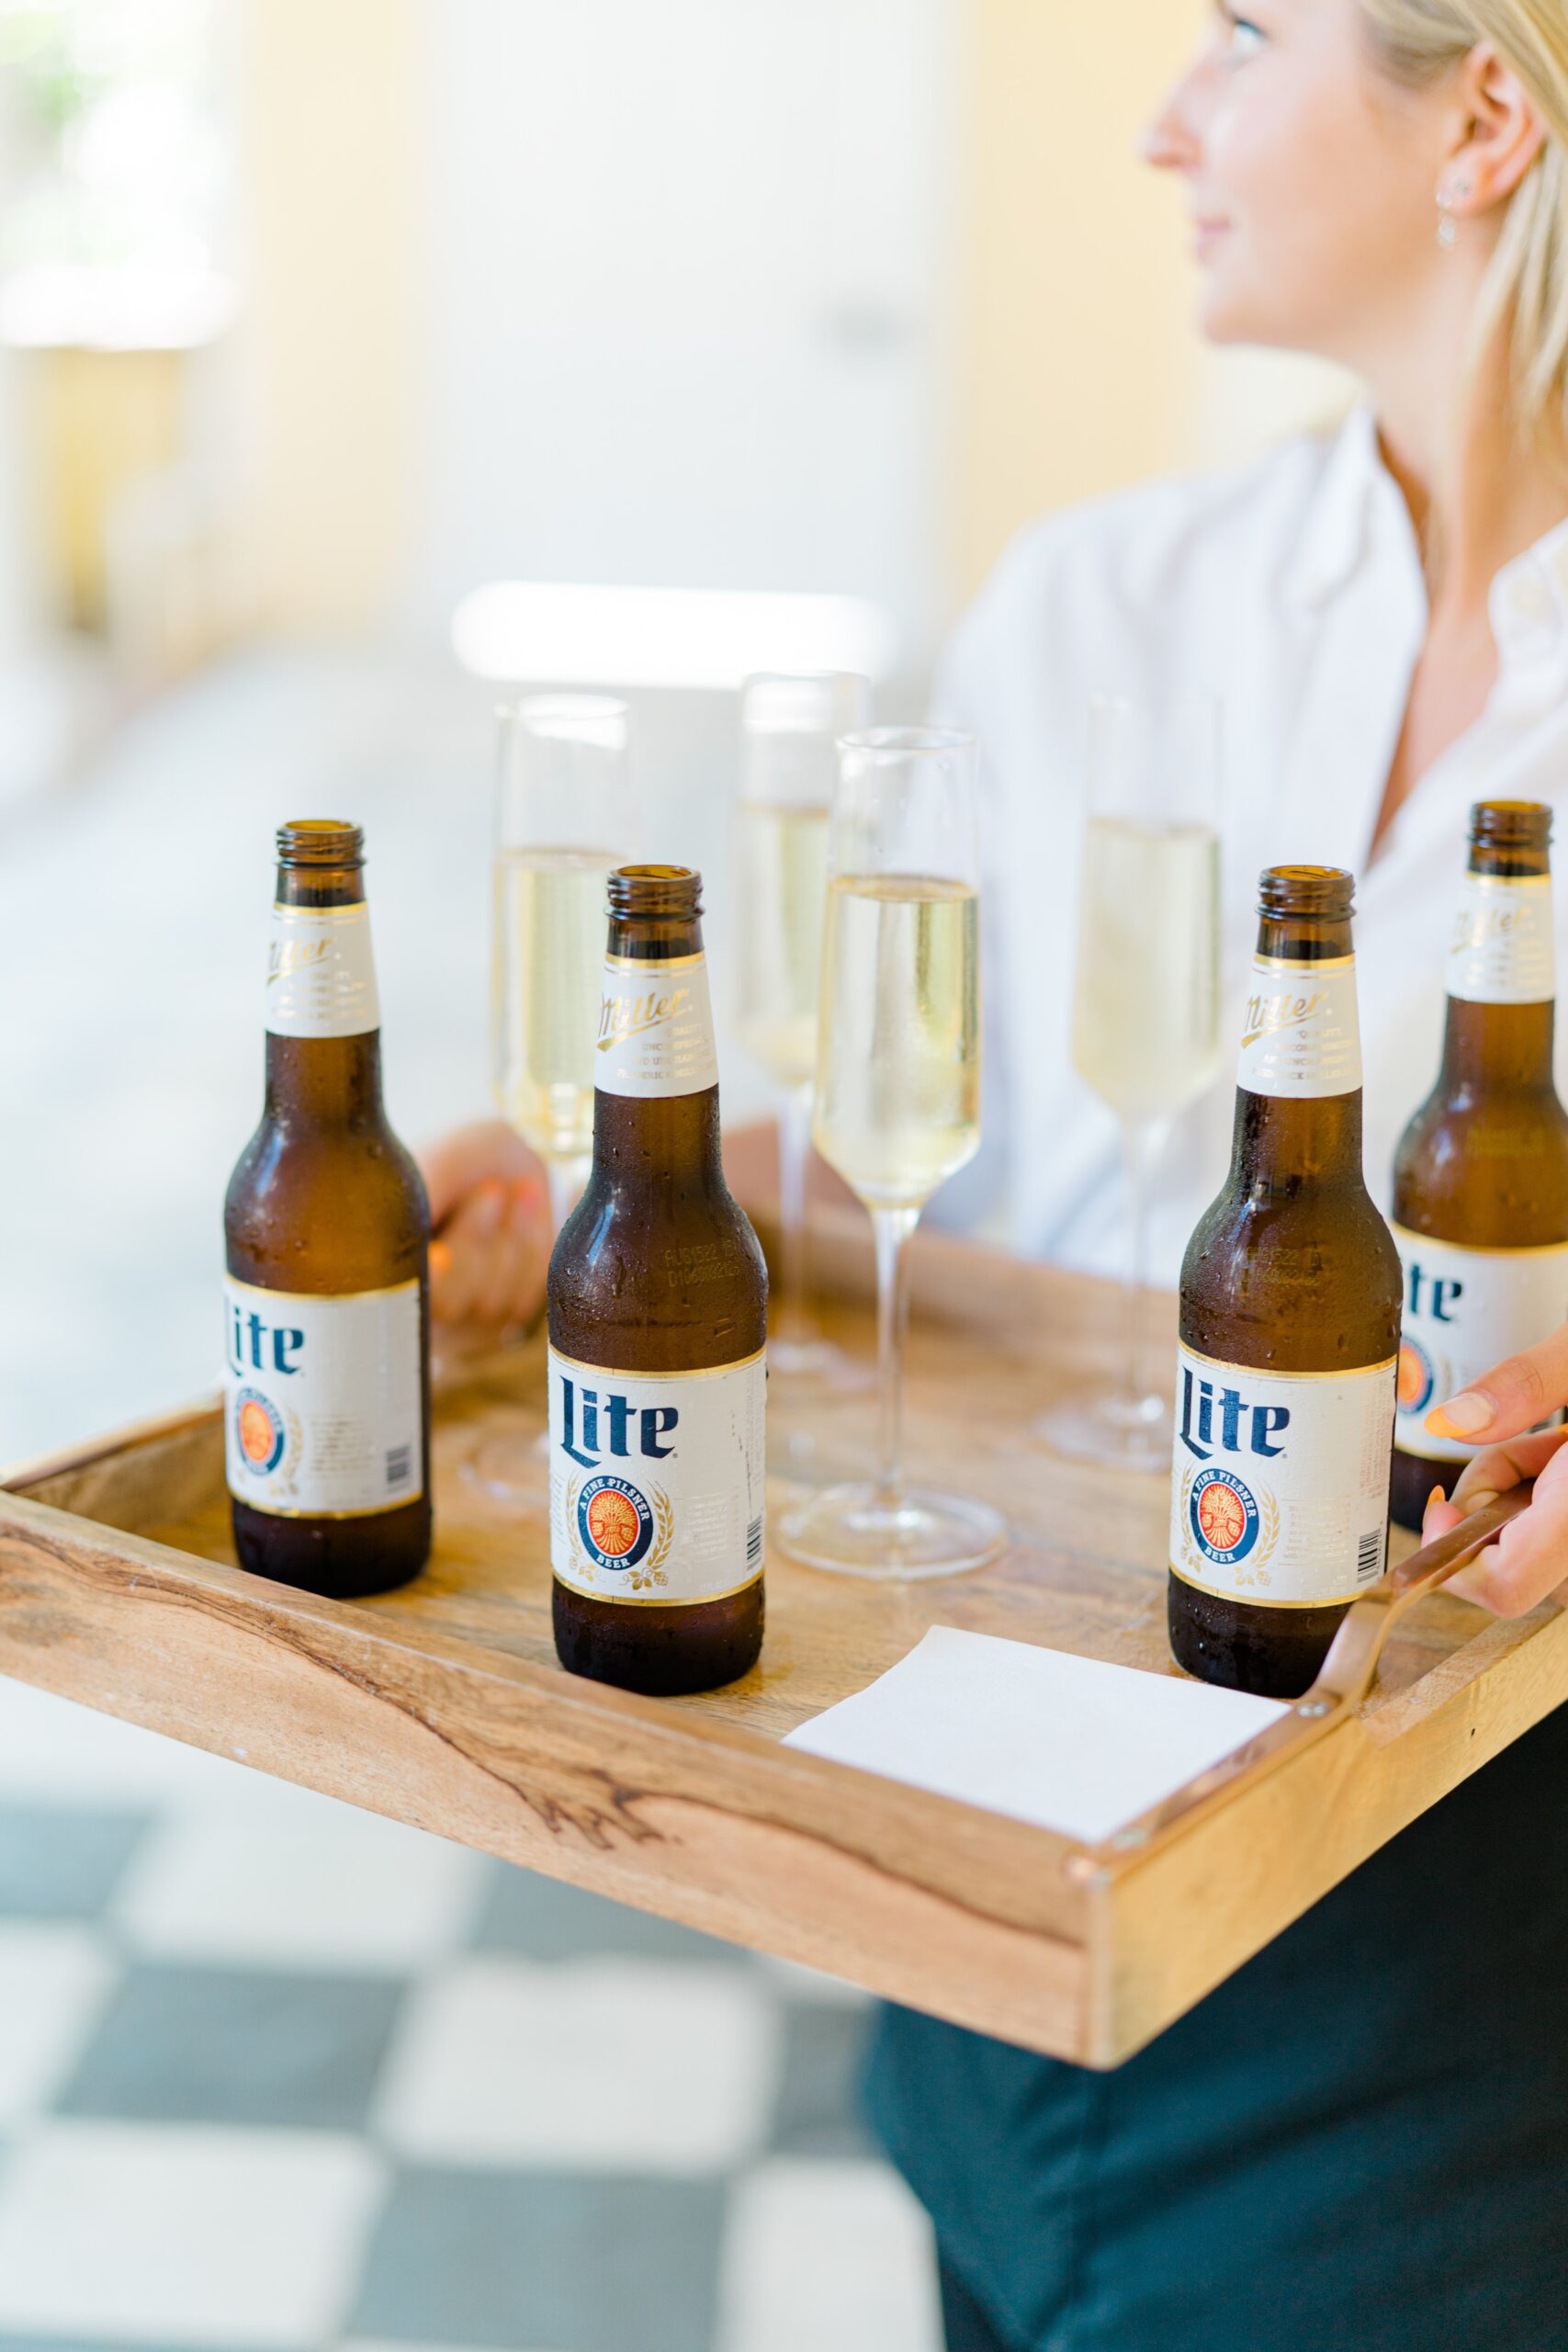 Champagne and miller lite wedding reception drink tray. Grooms favorite beer.